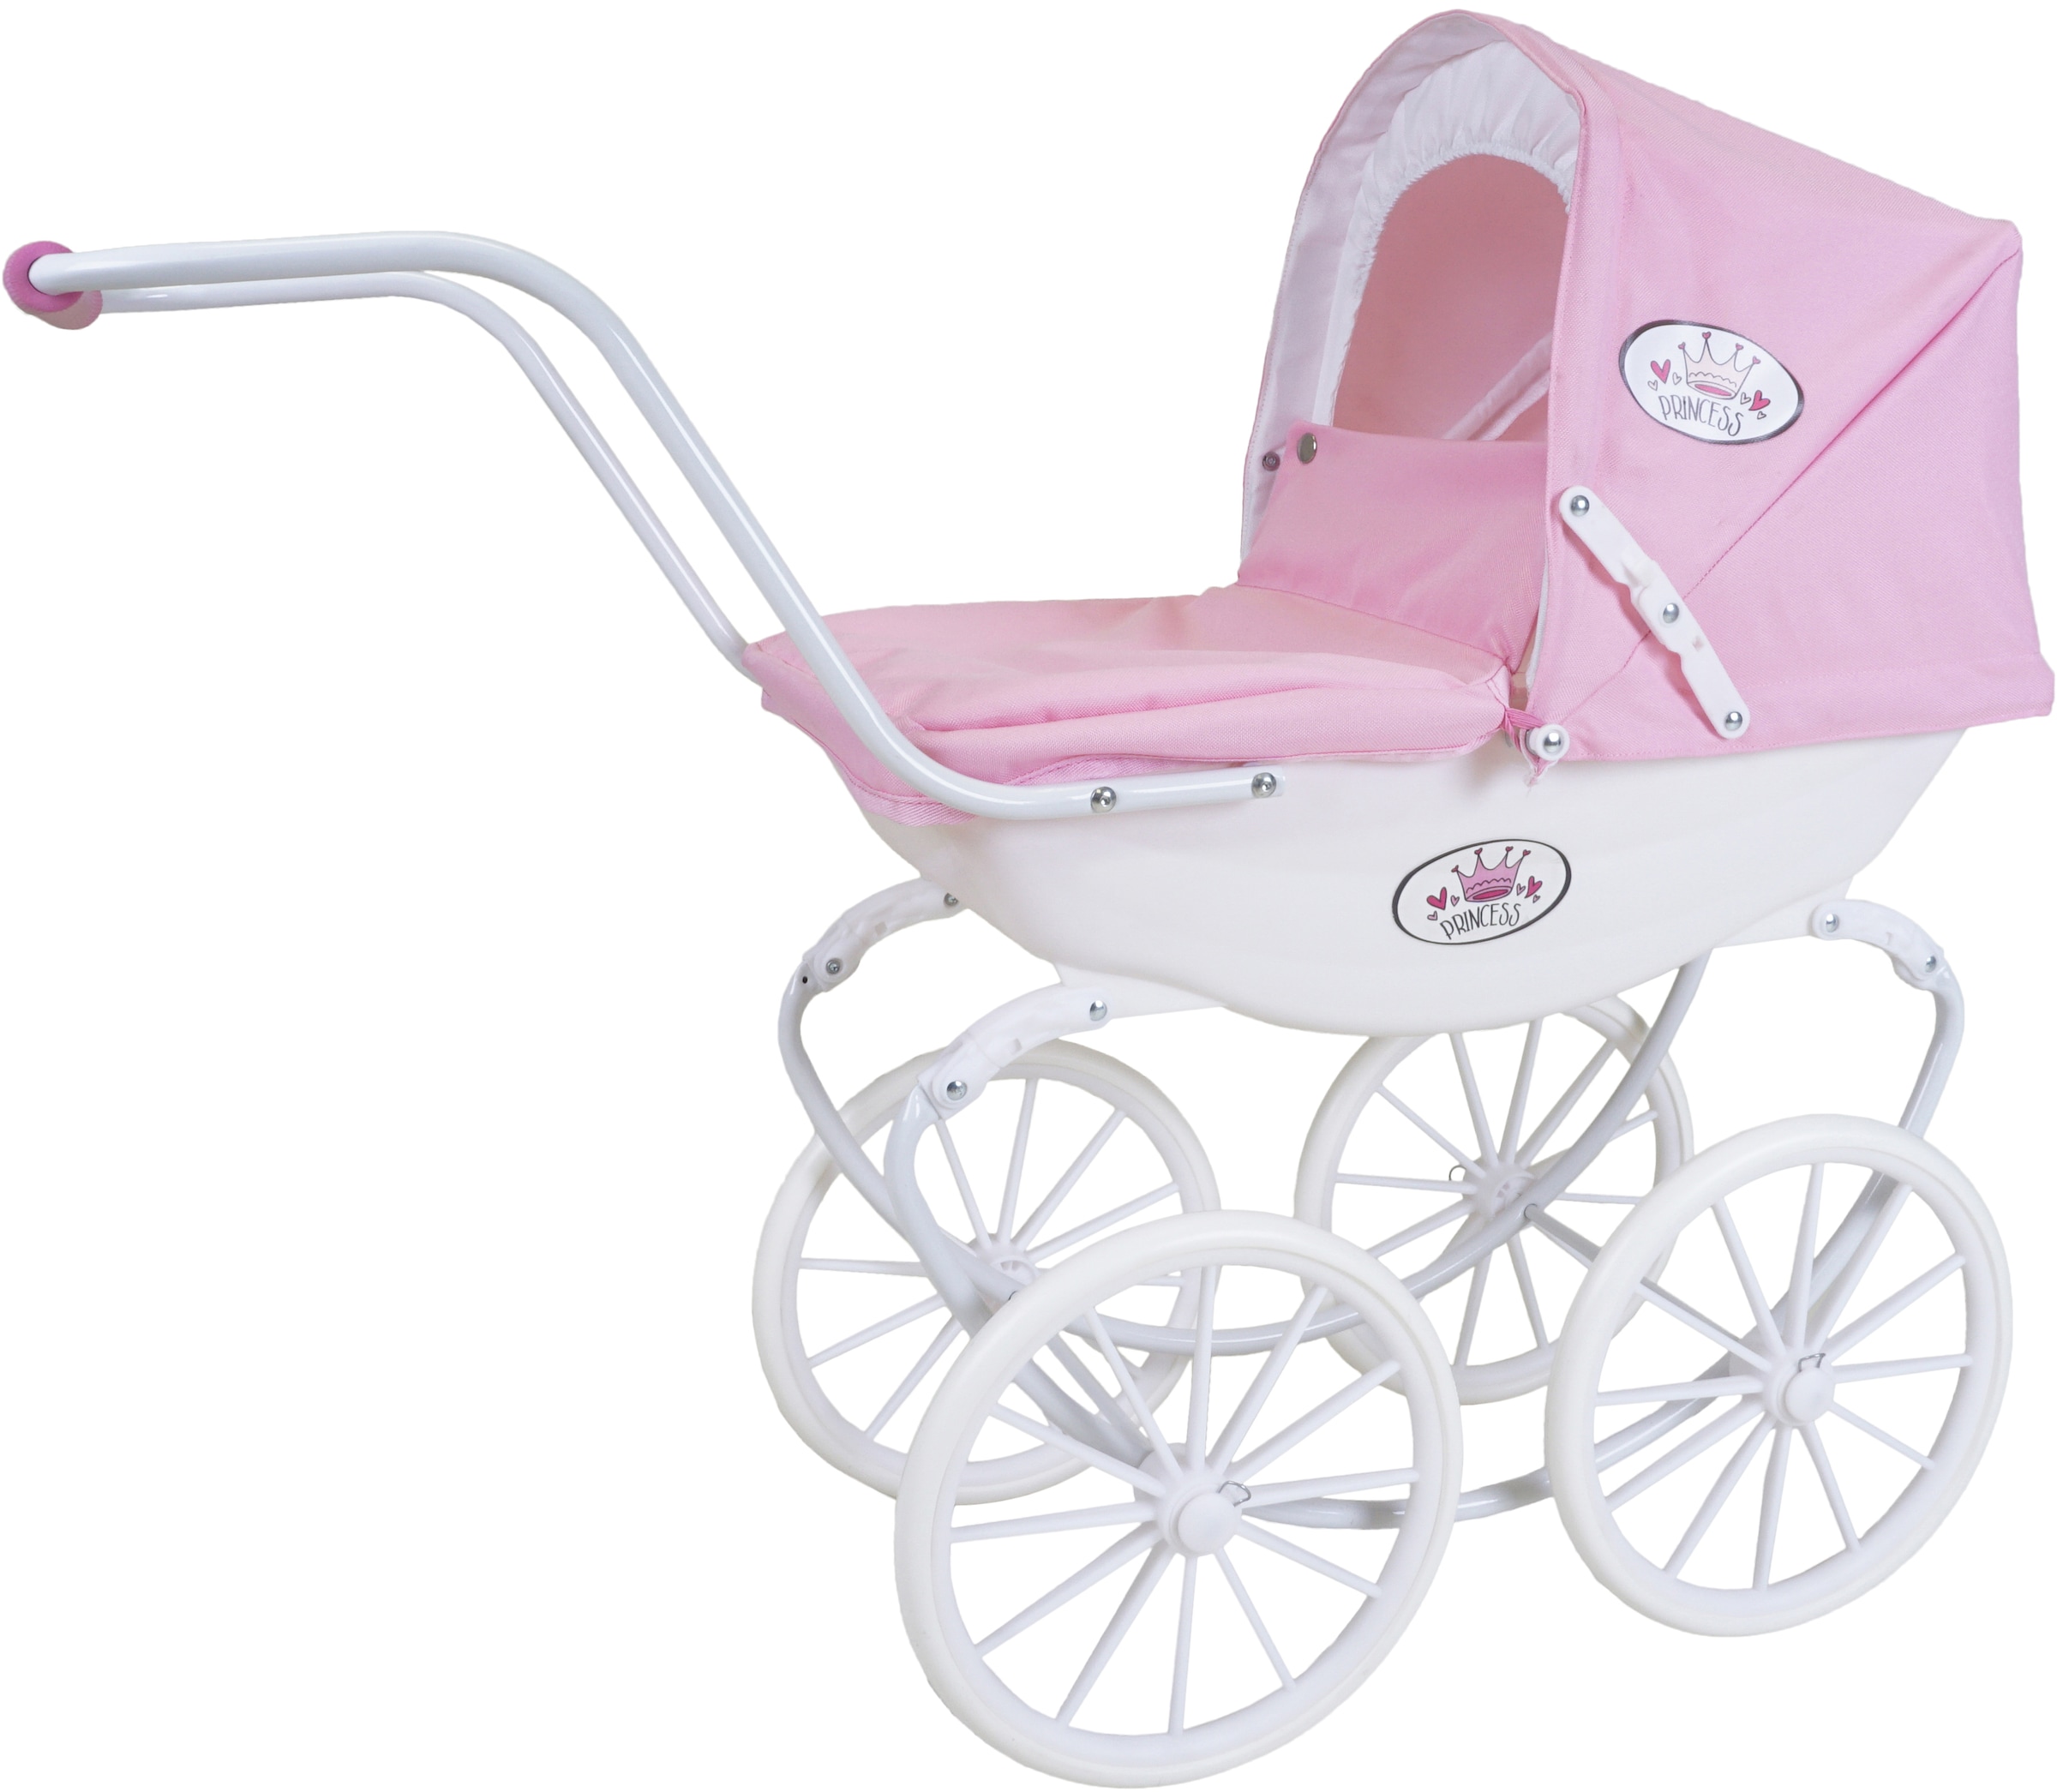 Knorrtoys® Puppenwagen »Classic - Princess White Rose«